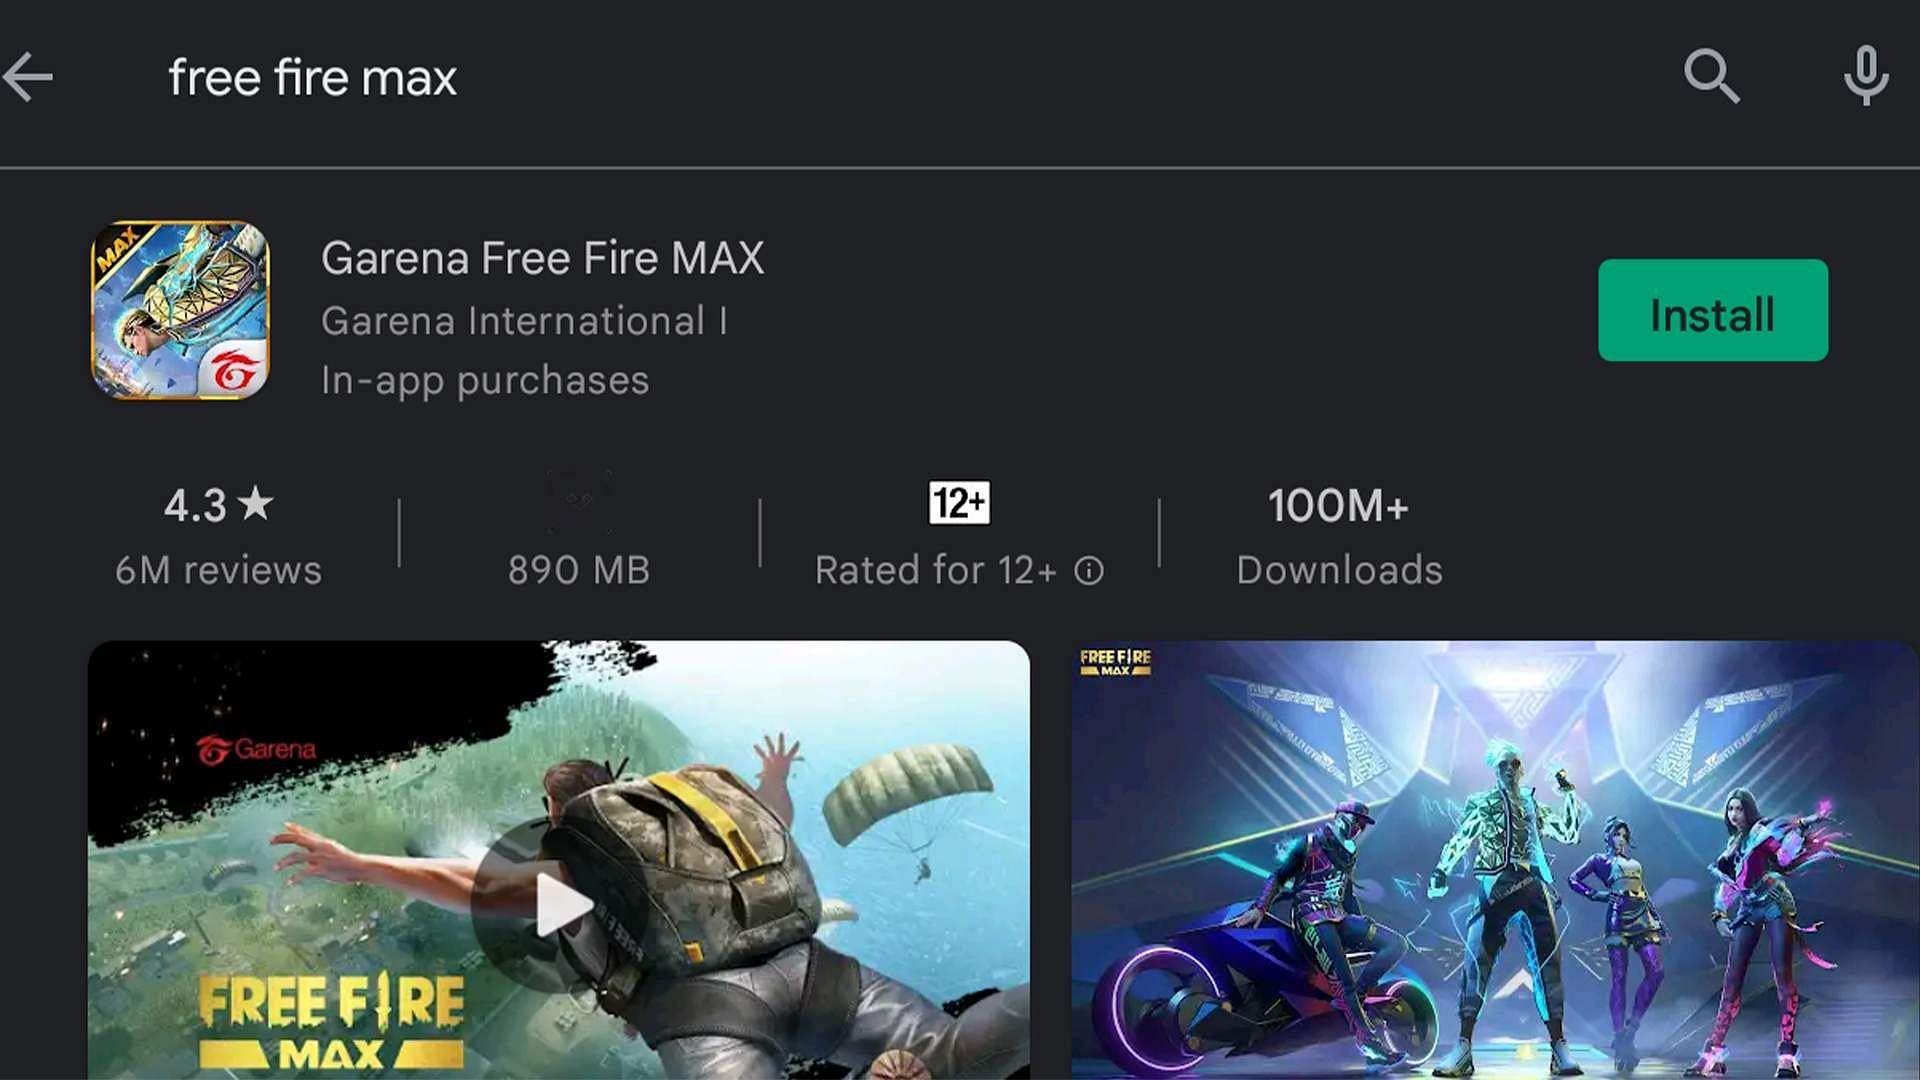 Free Fire MAX on the Google Play Store (Image via Google Play)